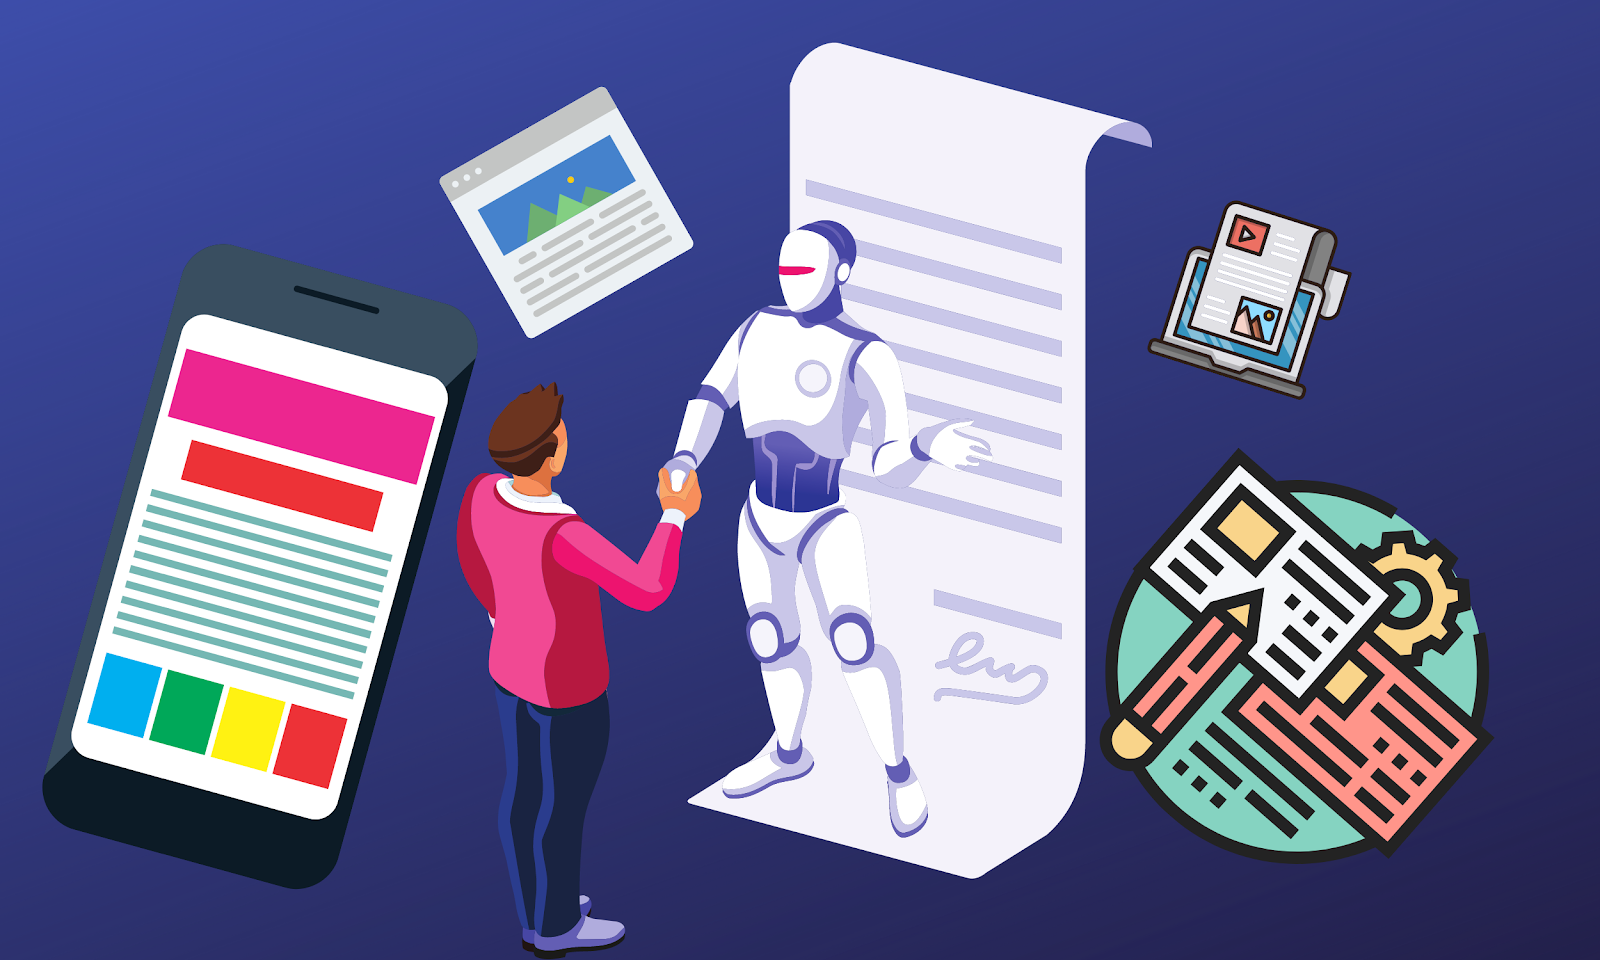 Top 20 AI Content Writing Tools In 2022